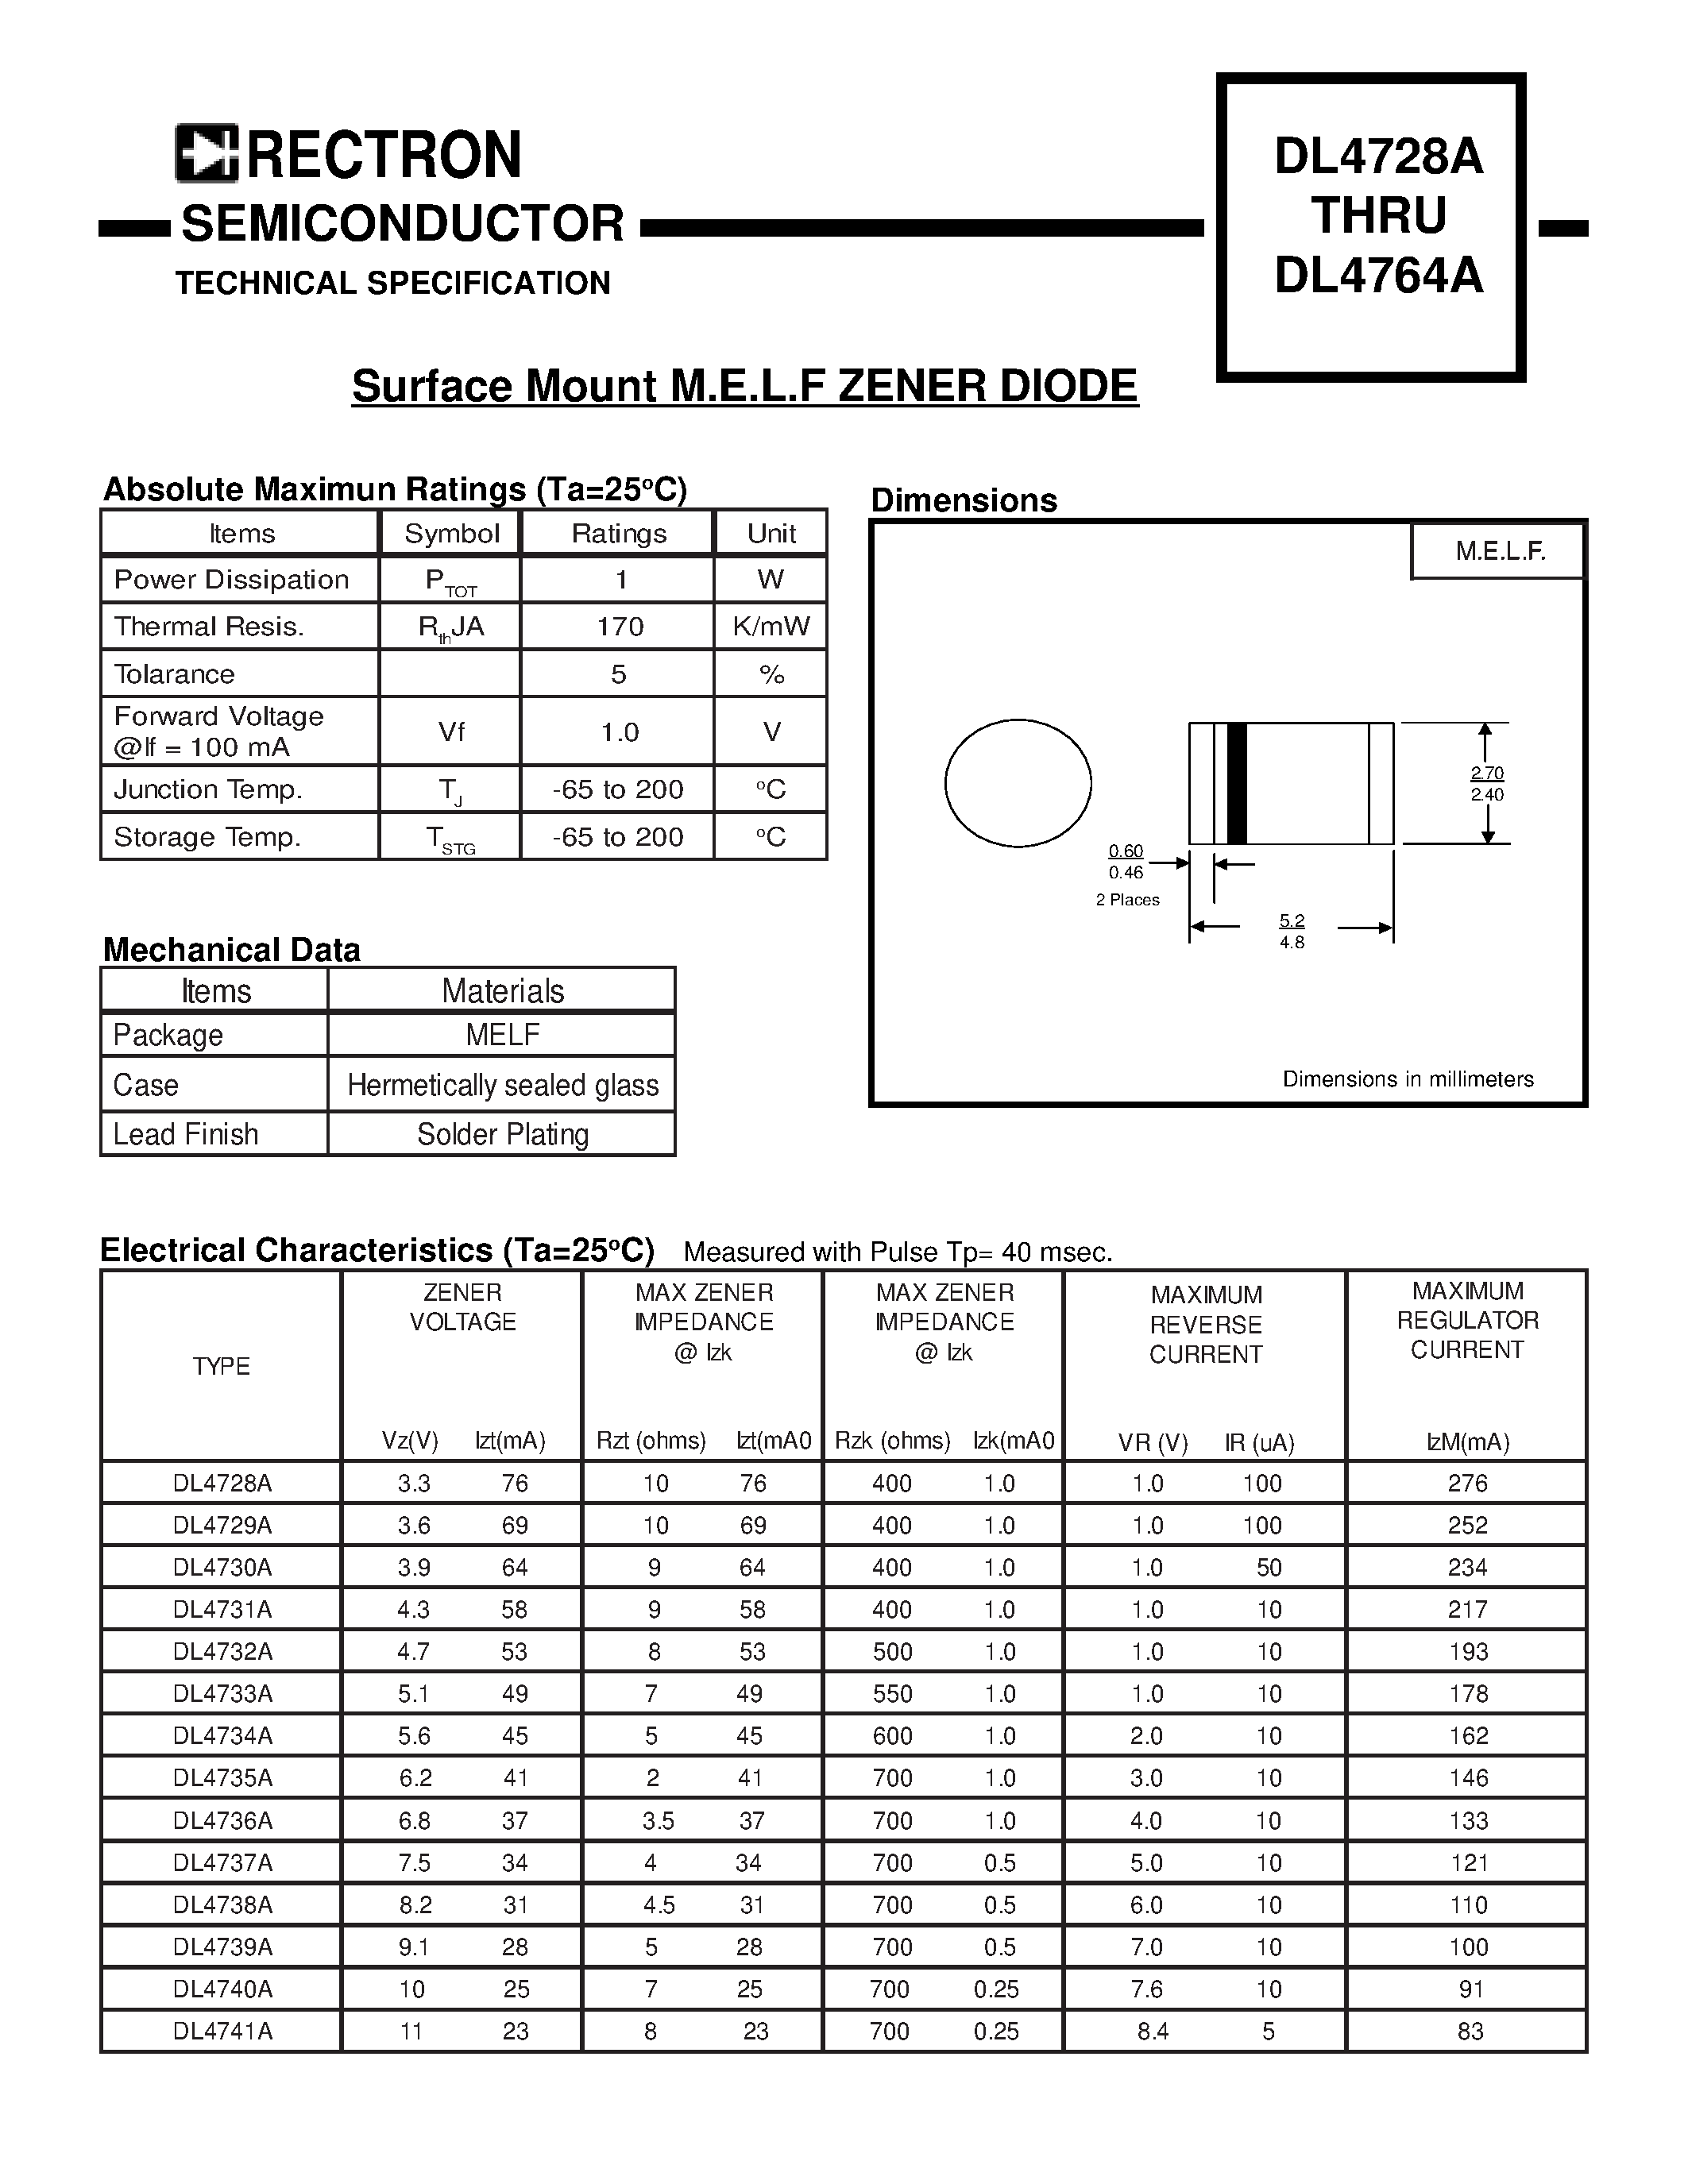 Datasheet DL4760A - Surface Mount M.E.L.F ZENER DIODE page 1